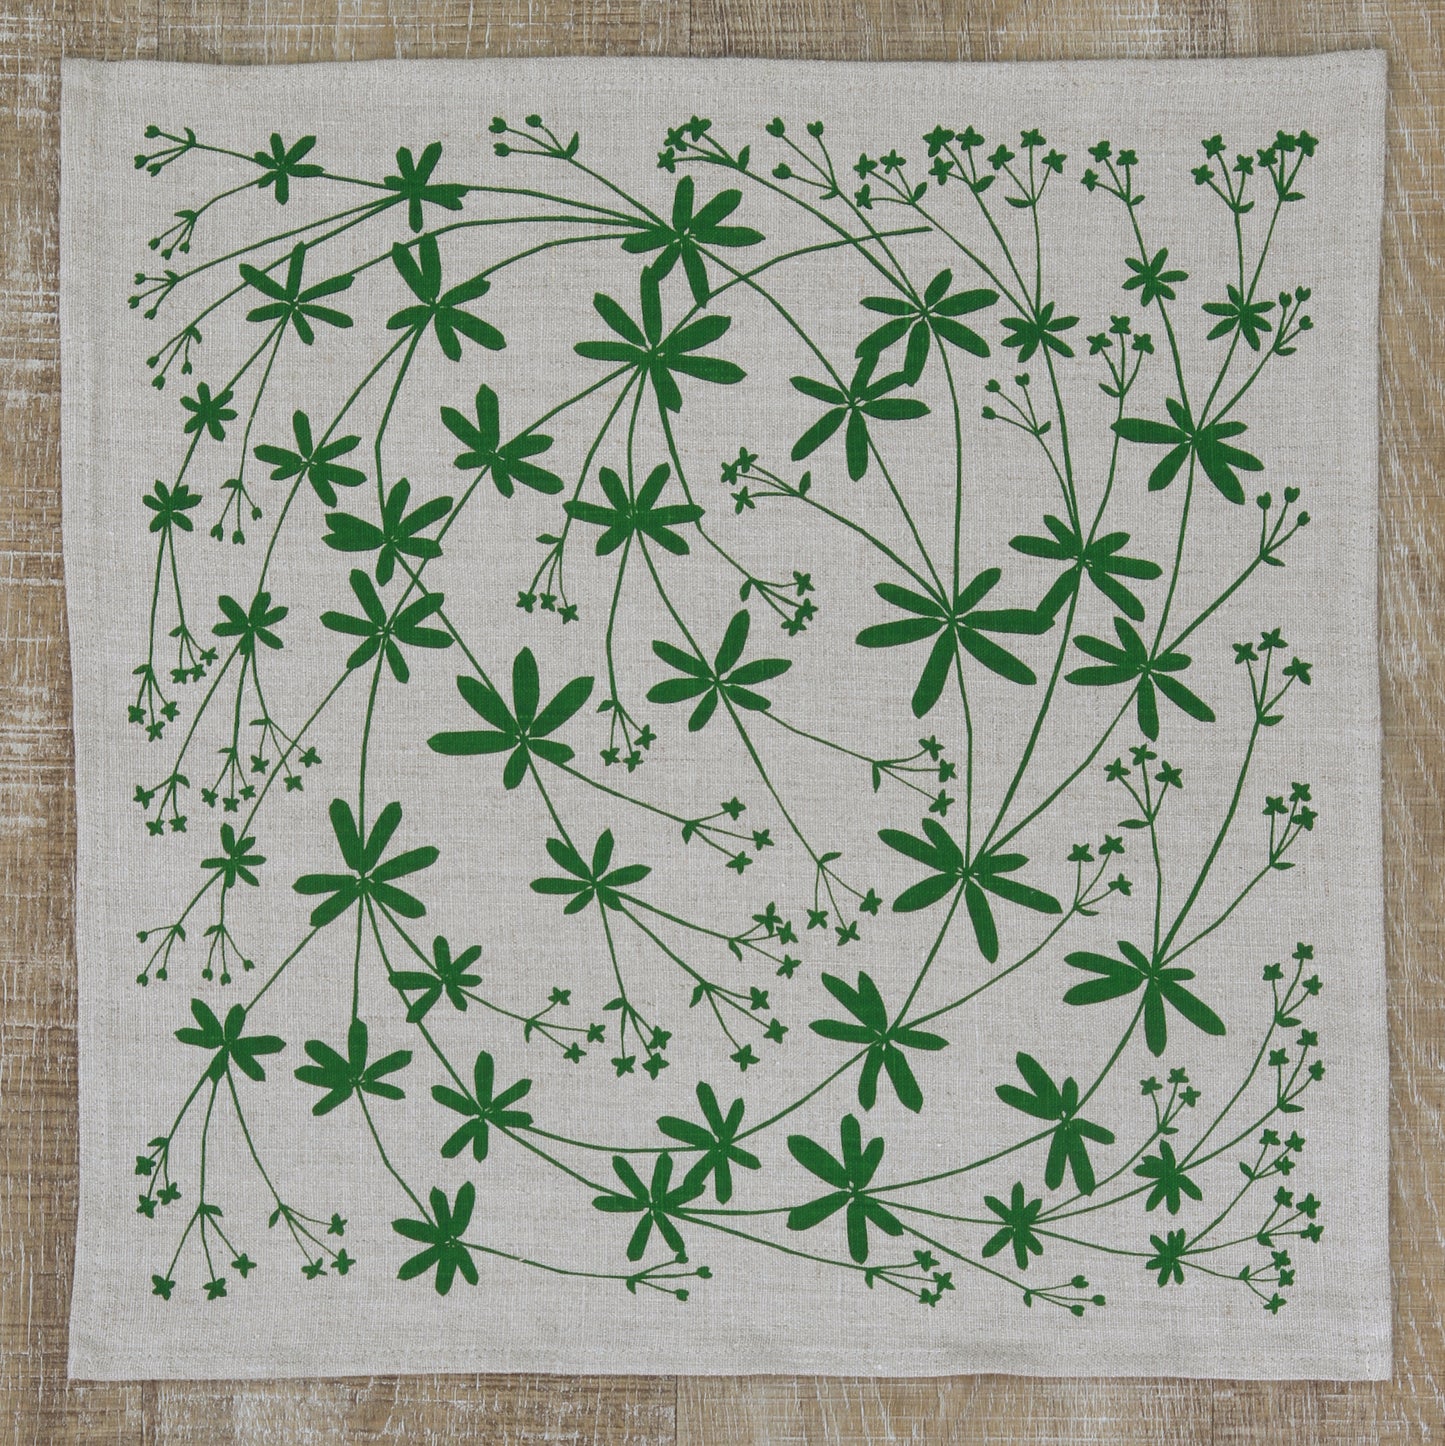 Bedstraw Napkin in Pine Green on Natural Flax Linen